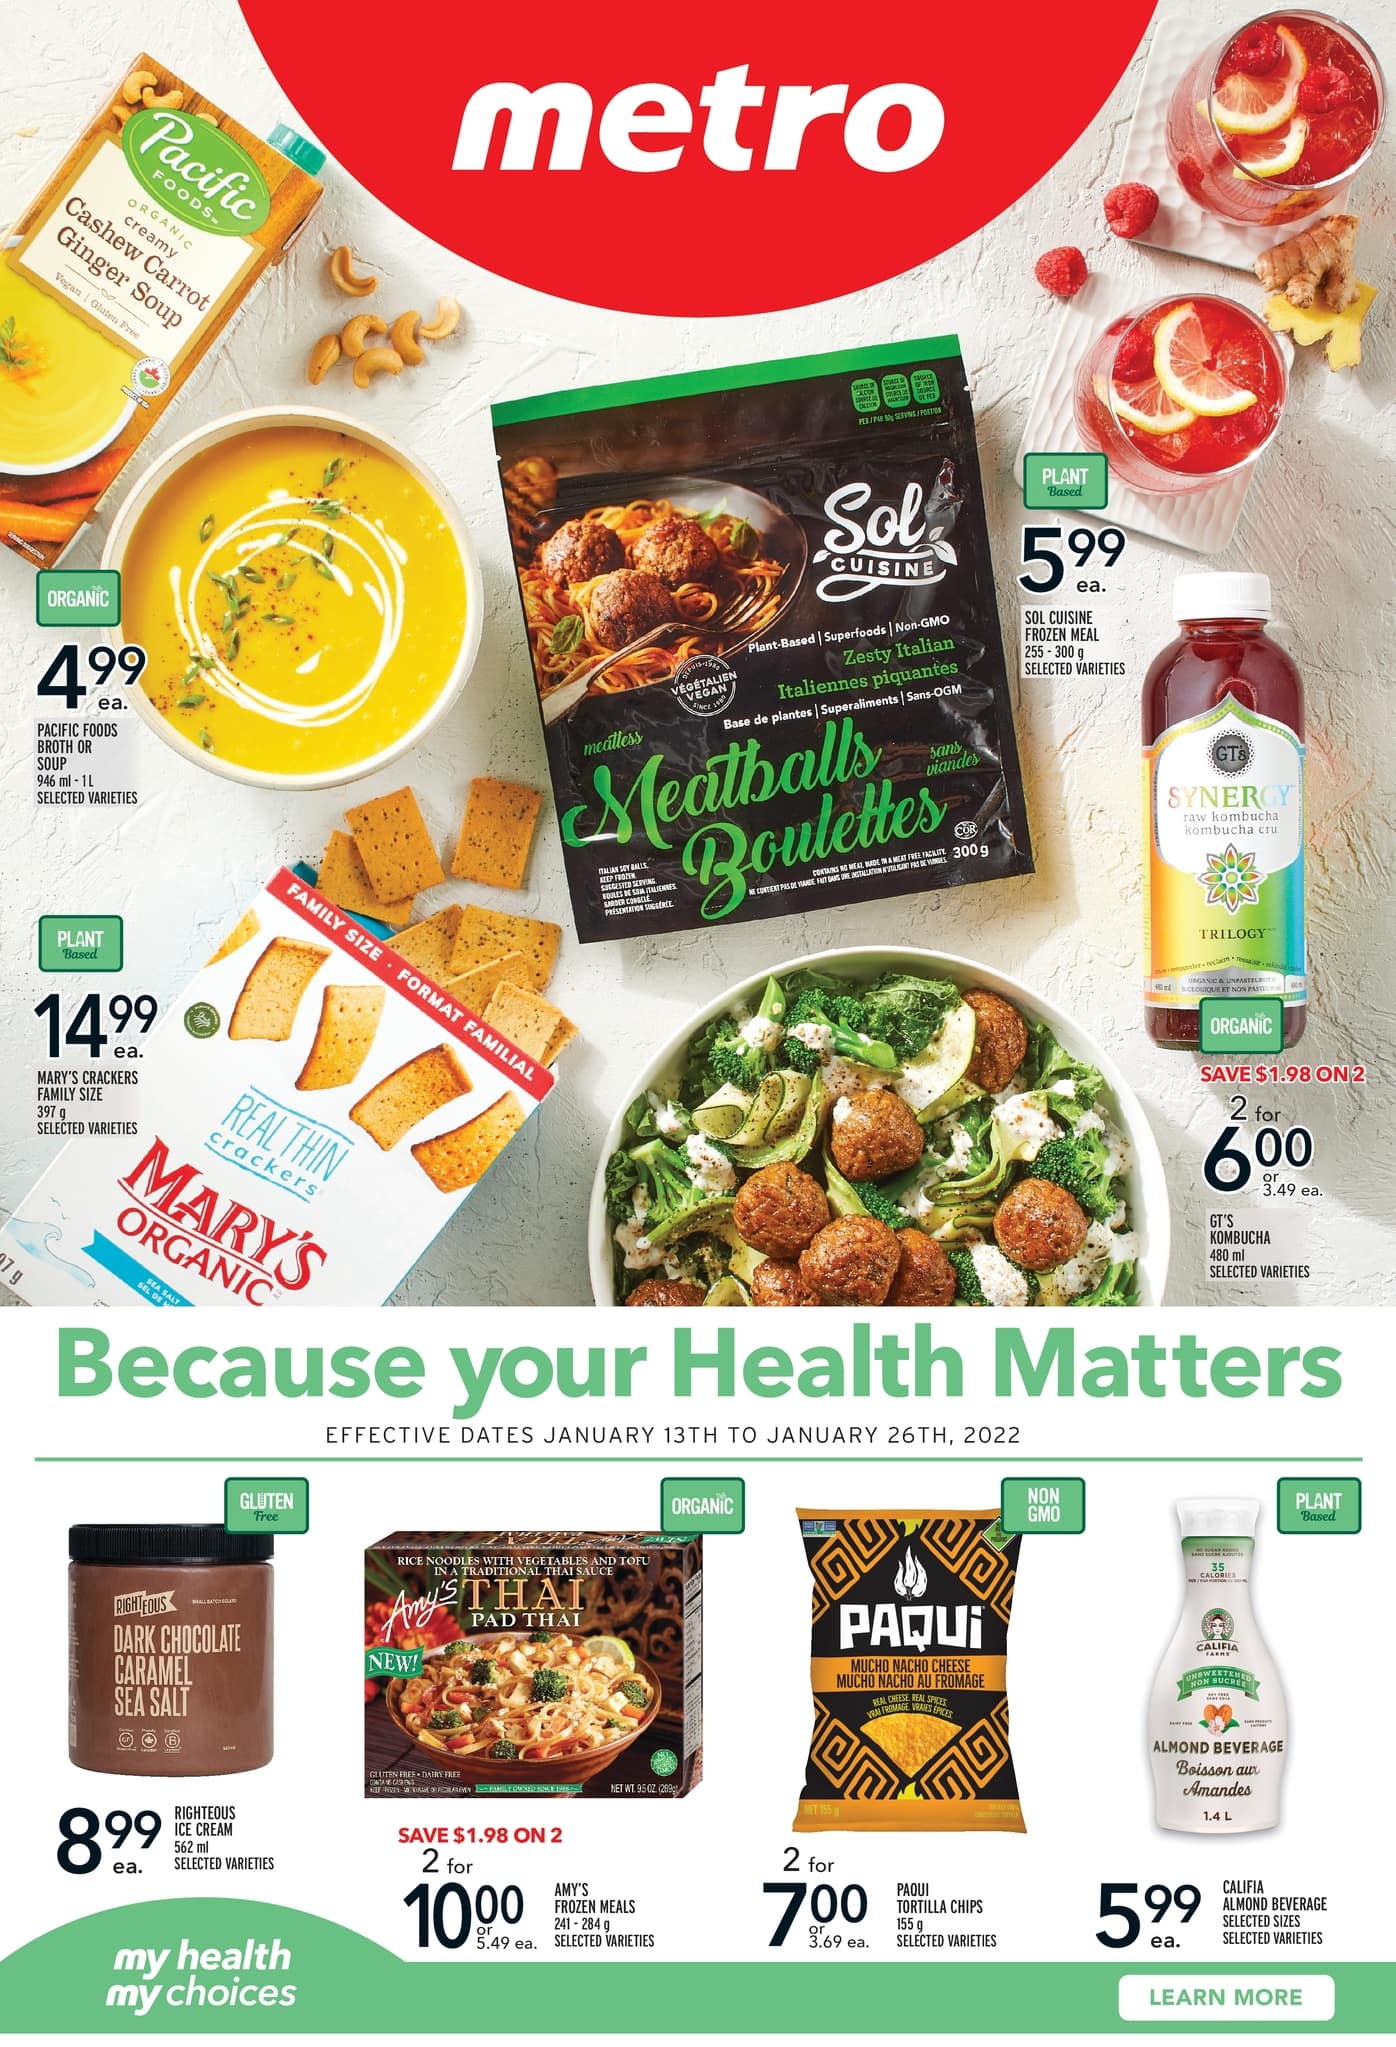 Metro - Because your Health Matters